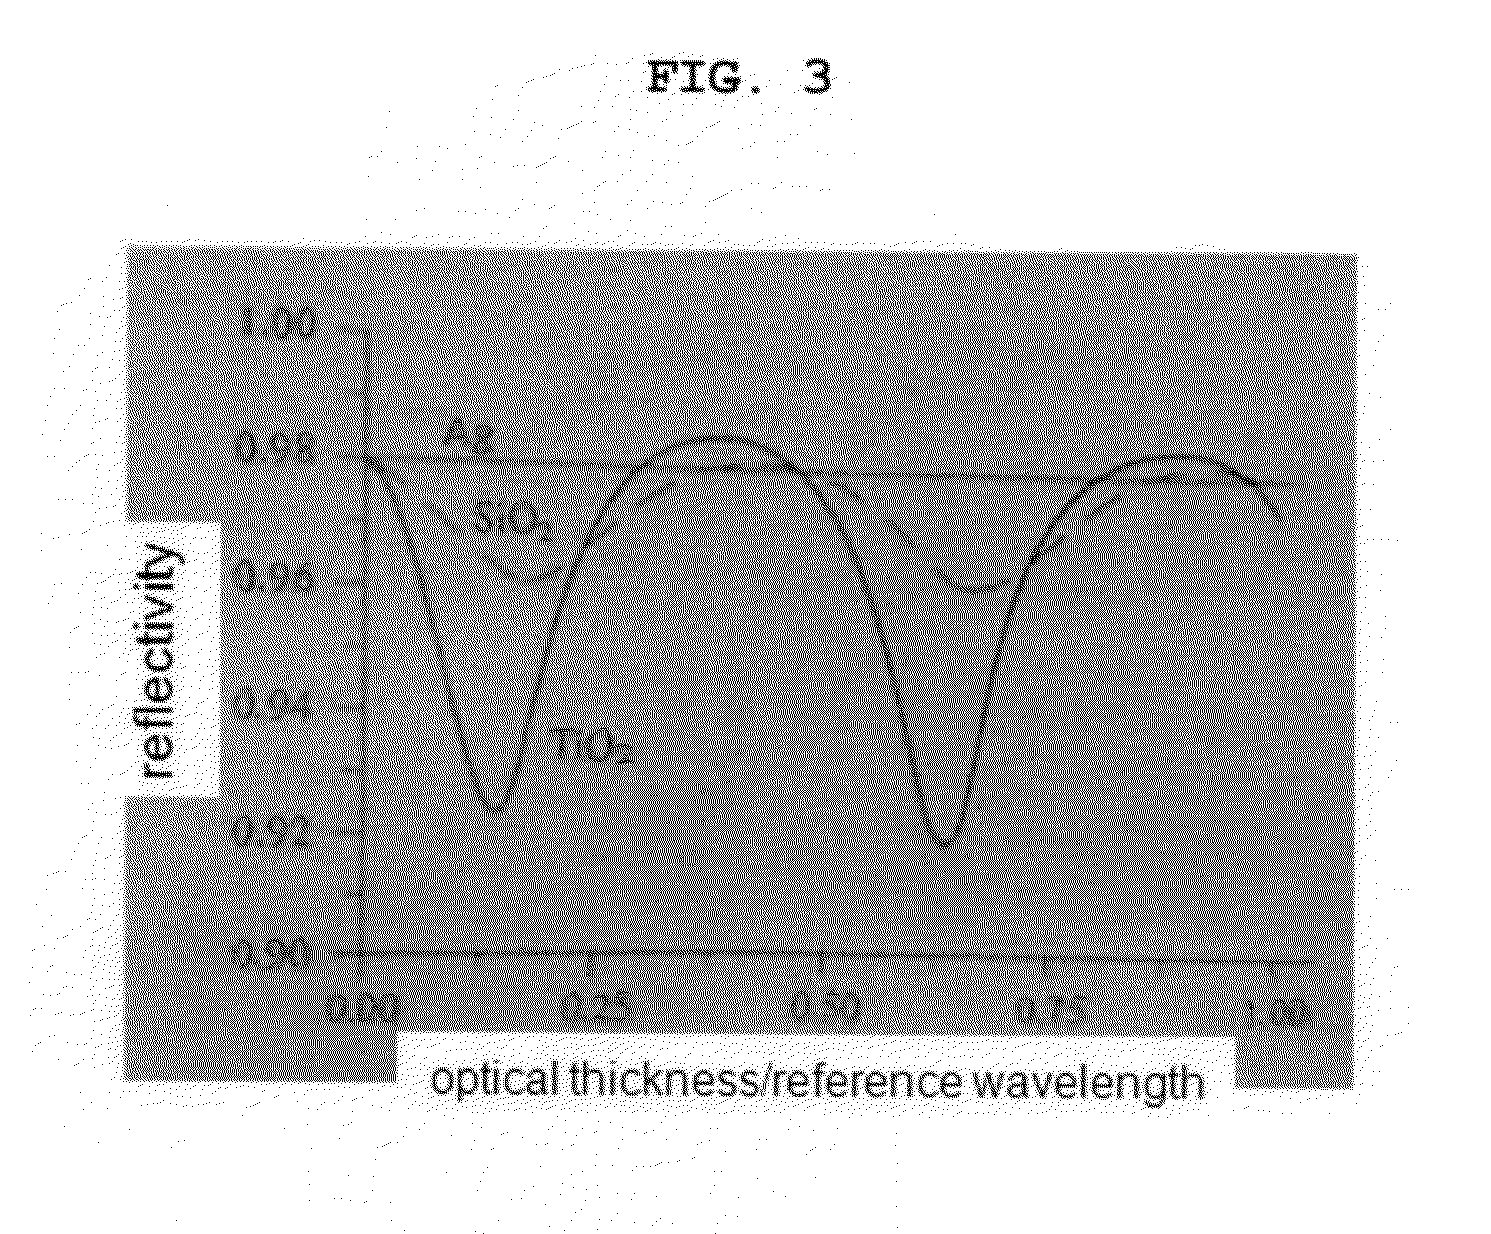 Magnetic particle having a highly reflective protective film, and method for manufacturing same